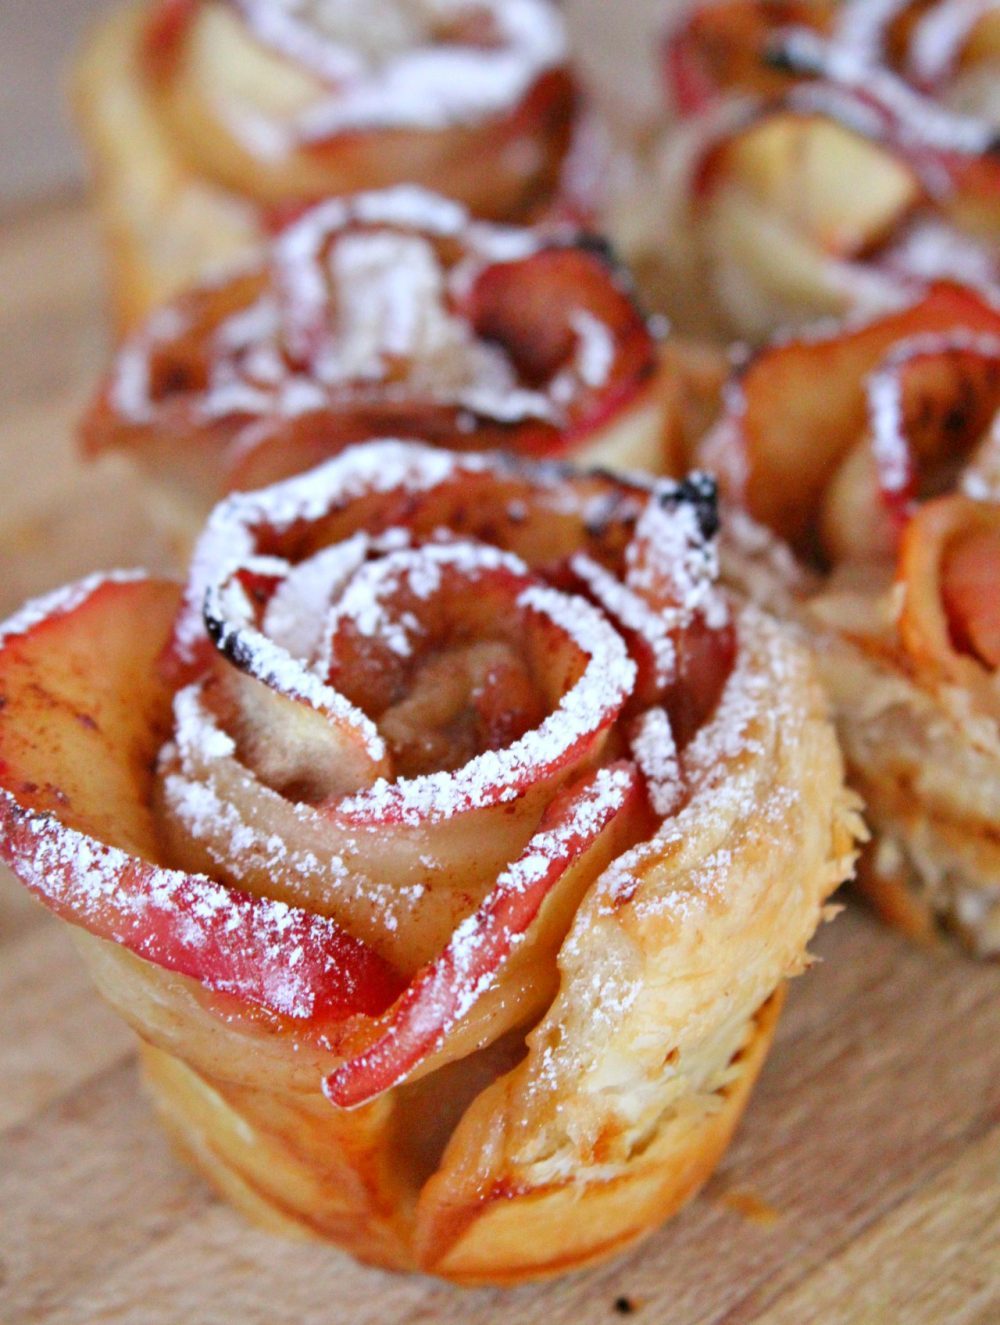 How to make apple roses